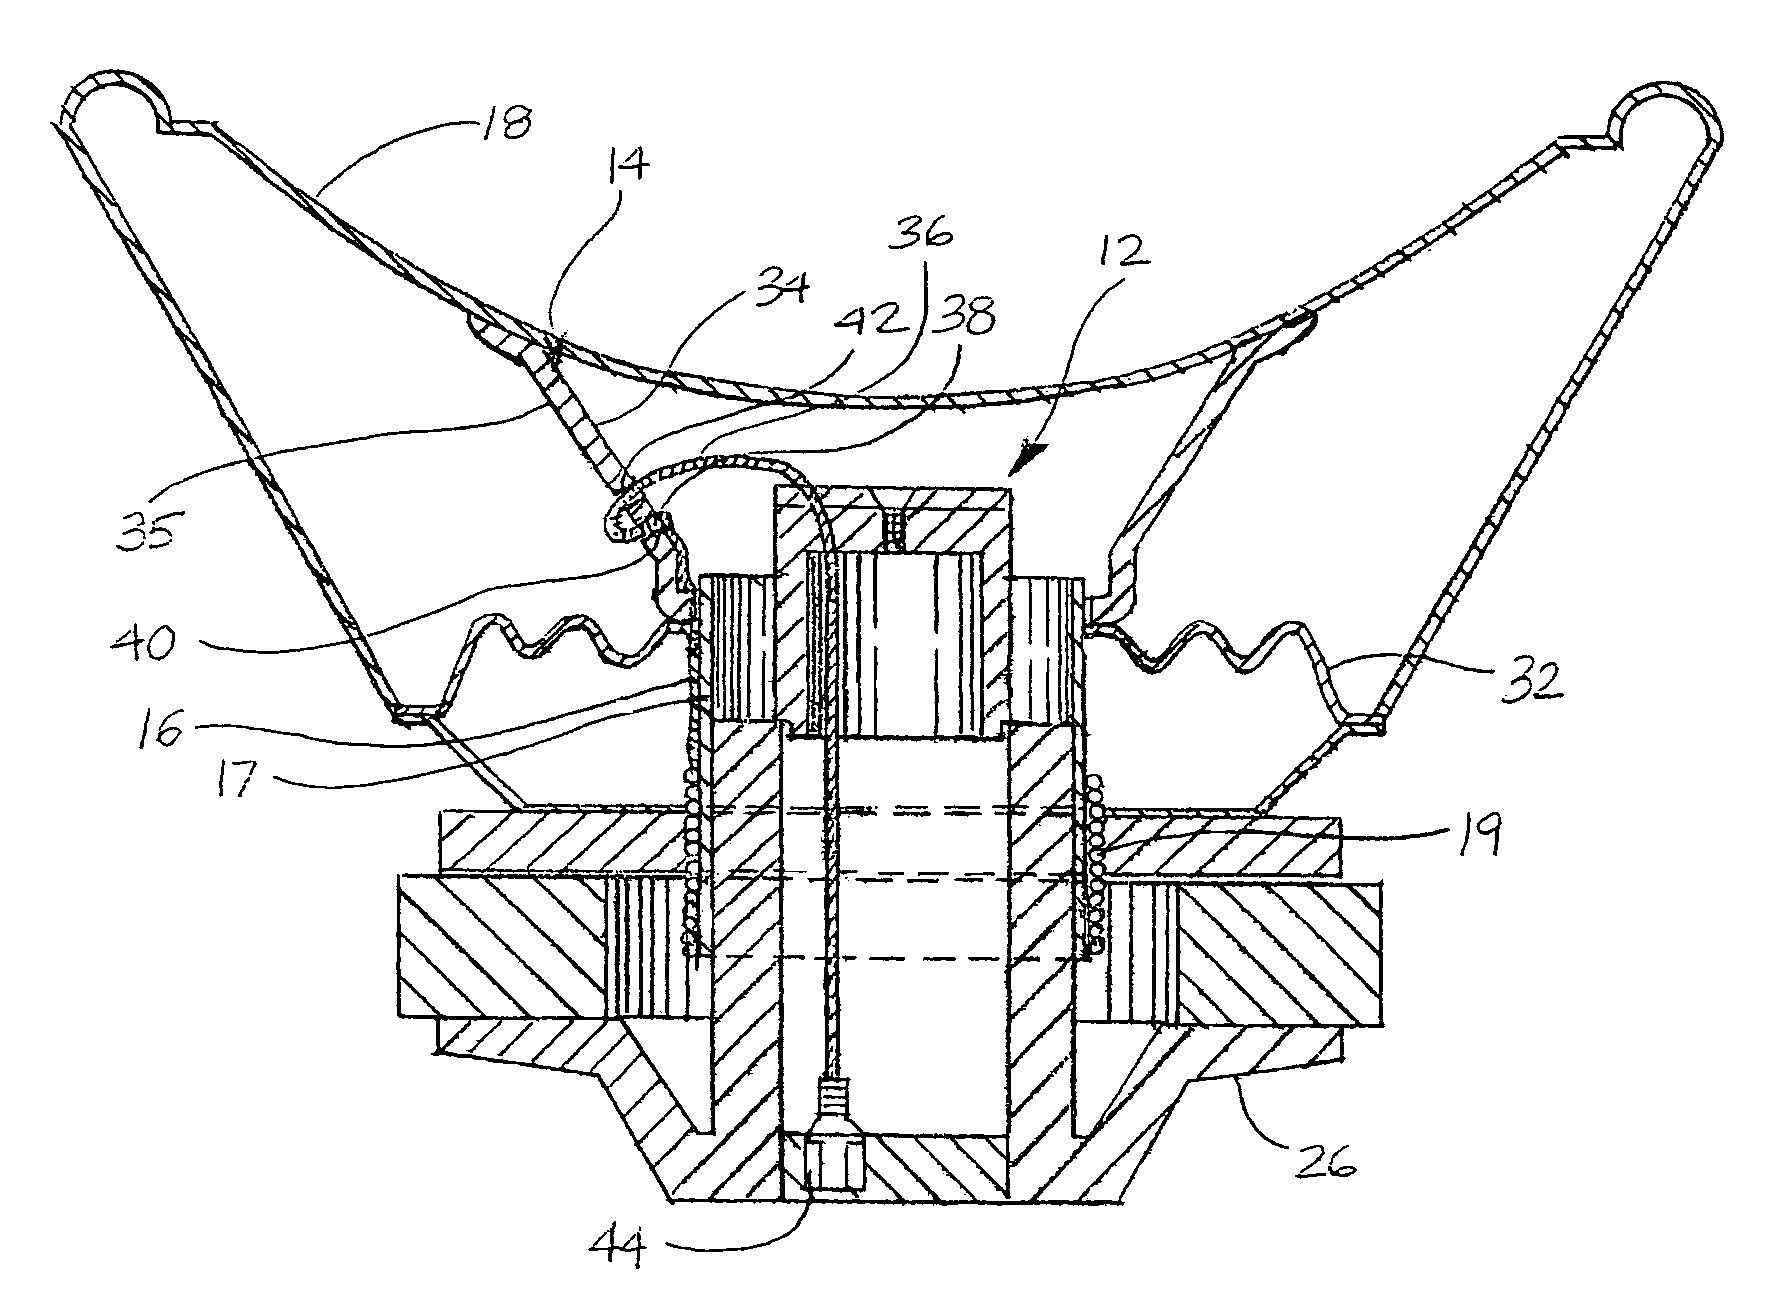 Loudspeaker having an inner lead wire system and related method of protecting the lead wires